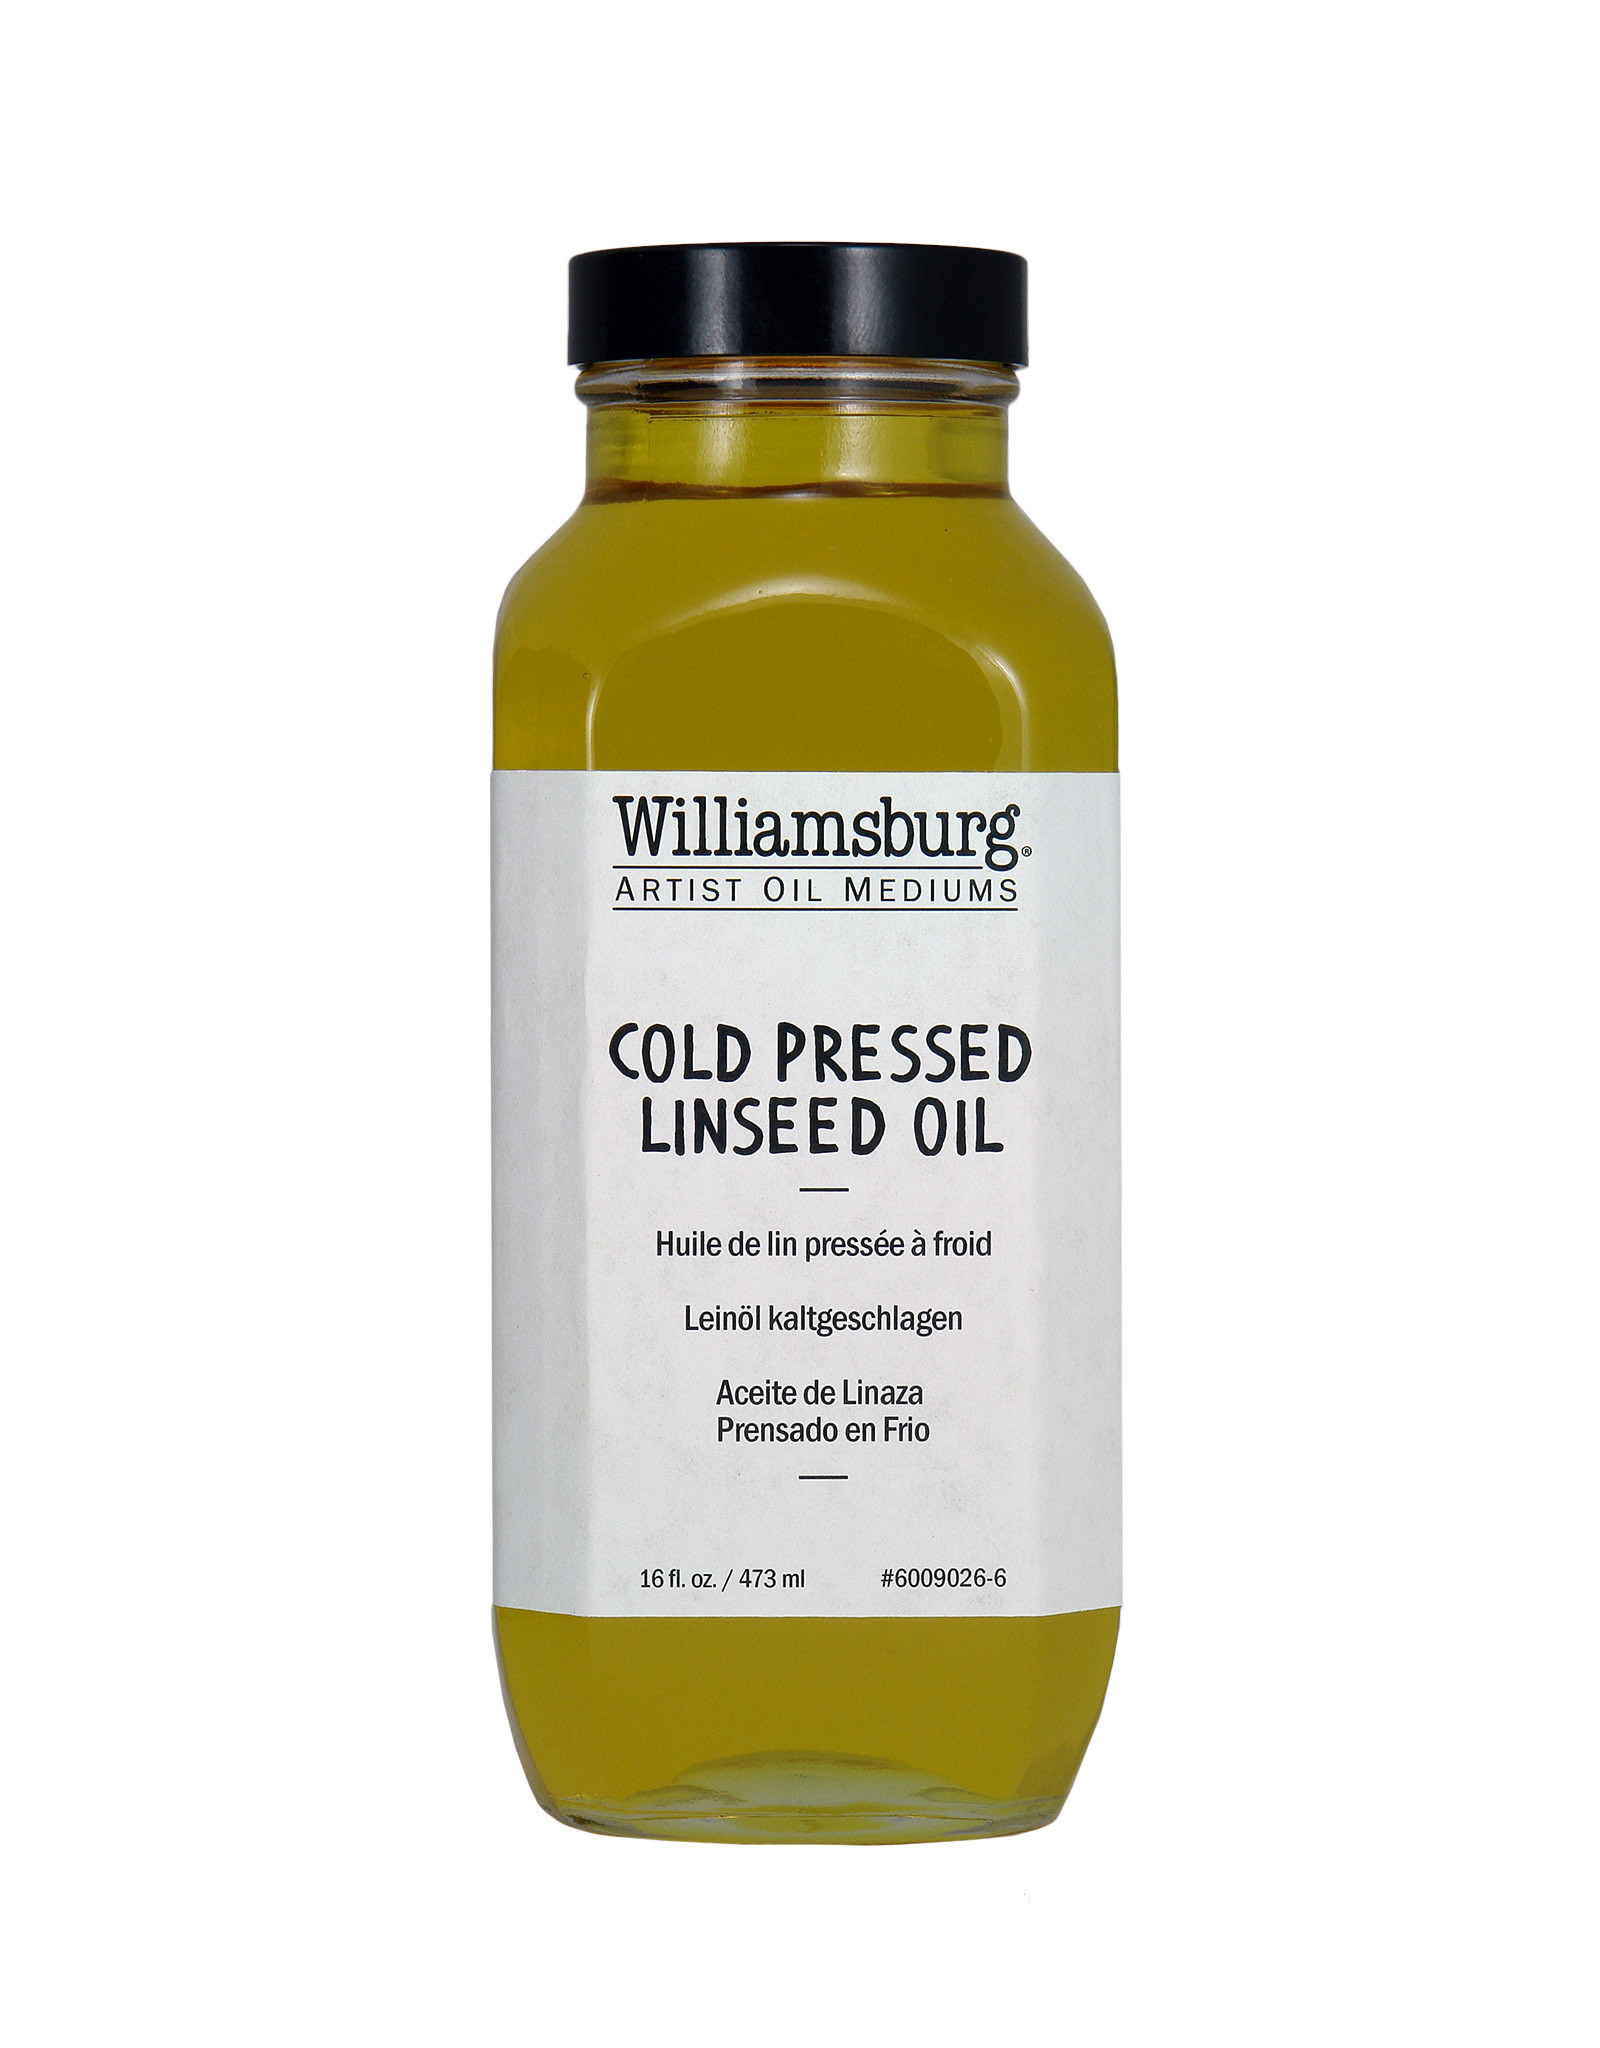 Golden Williamsburg Cold Pressed Linseed Oil 16oz